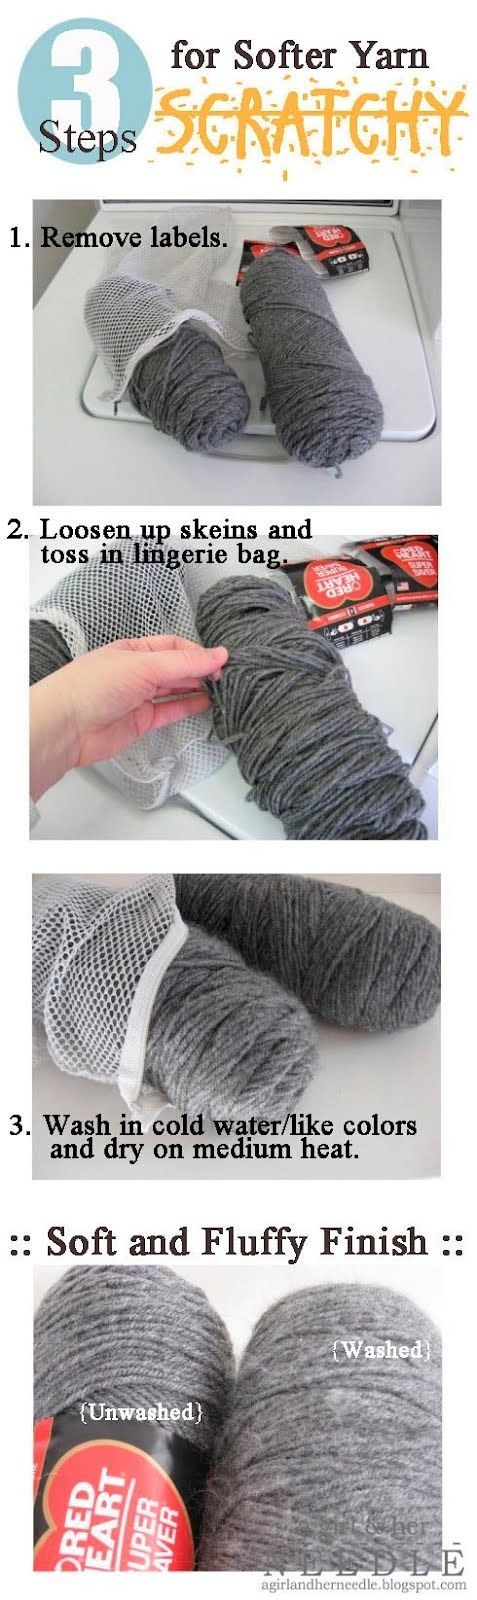 Soften scratchy yarn. Thanks ging for pinning this!